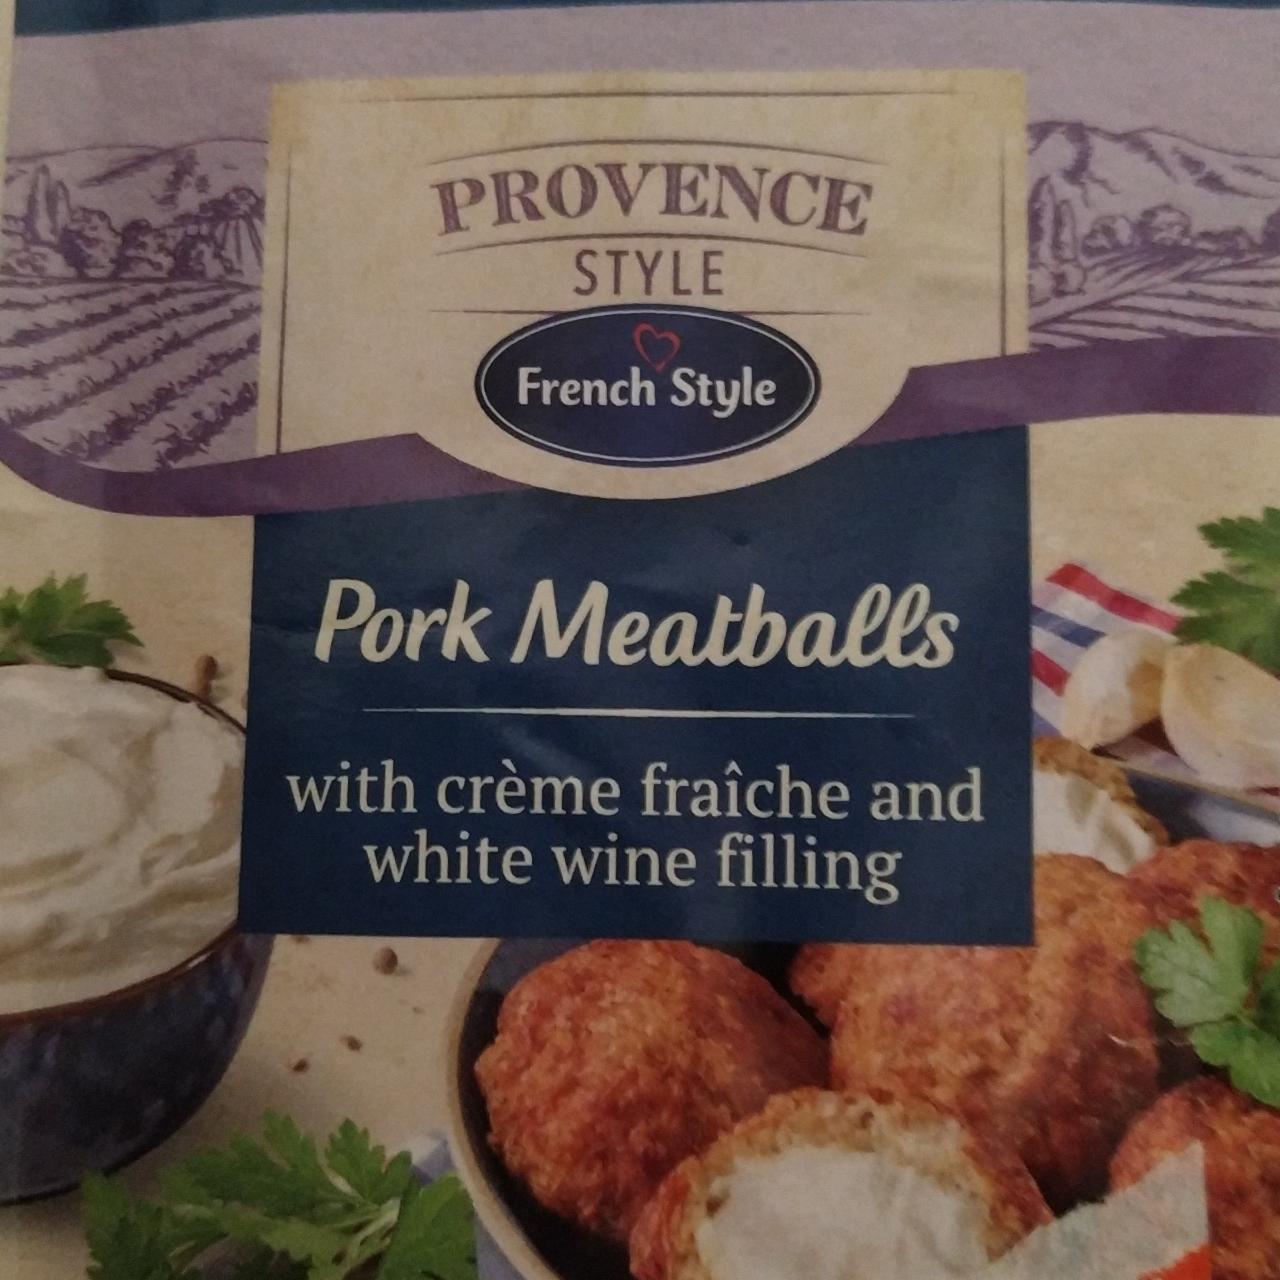 Fotografie - Pork Meatballs with creme fraiche and white wine filling Provence Style French Style